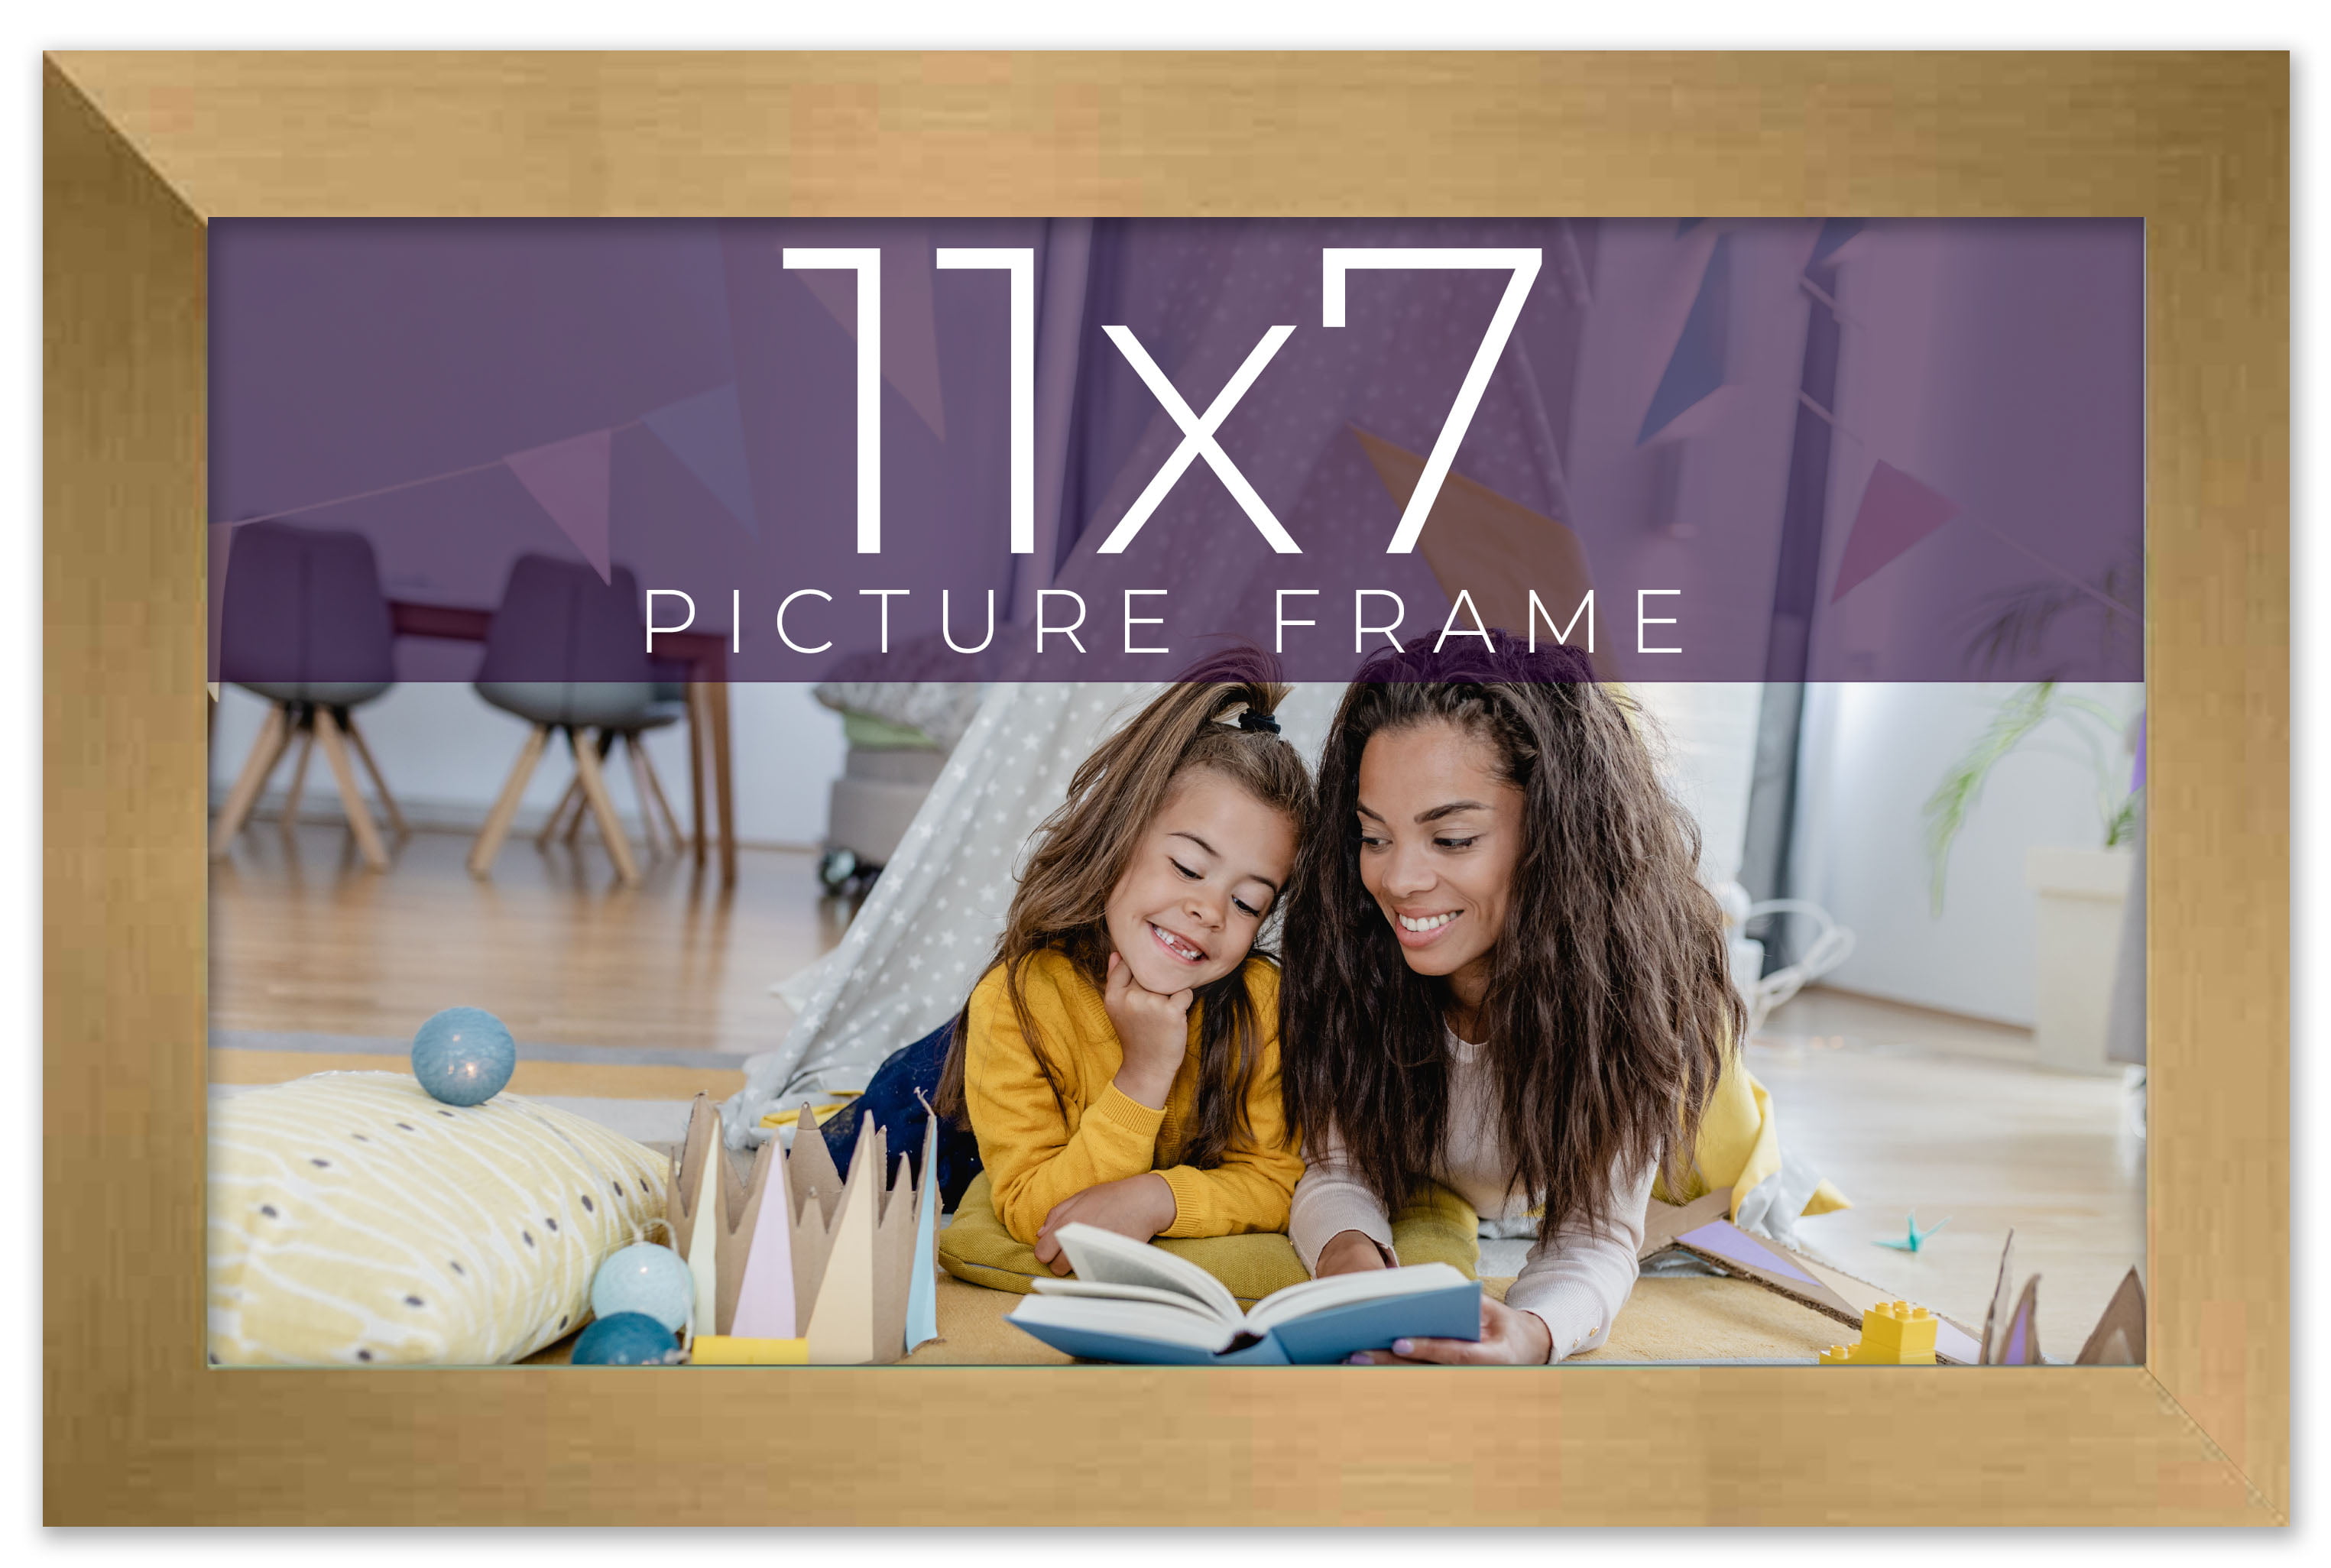  6x10 Frame Gold Real Wood Picture Frame Width 2 Inches, Interior Frame Depth 0.5 Inches